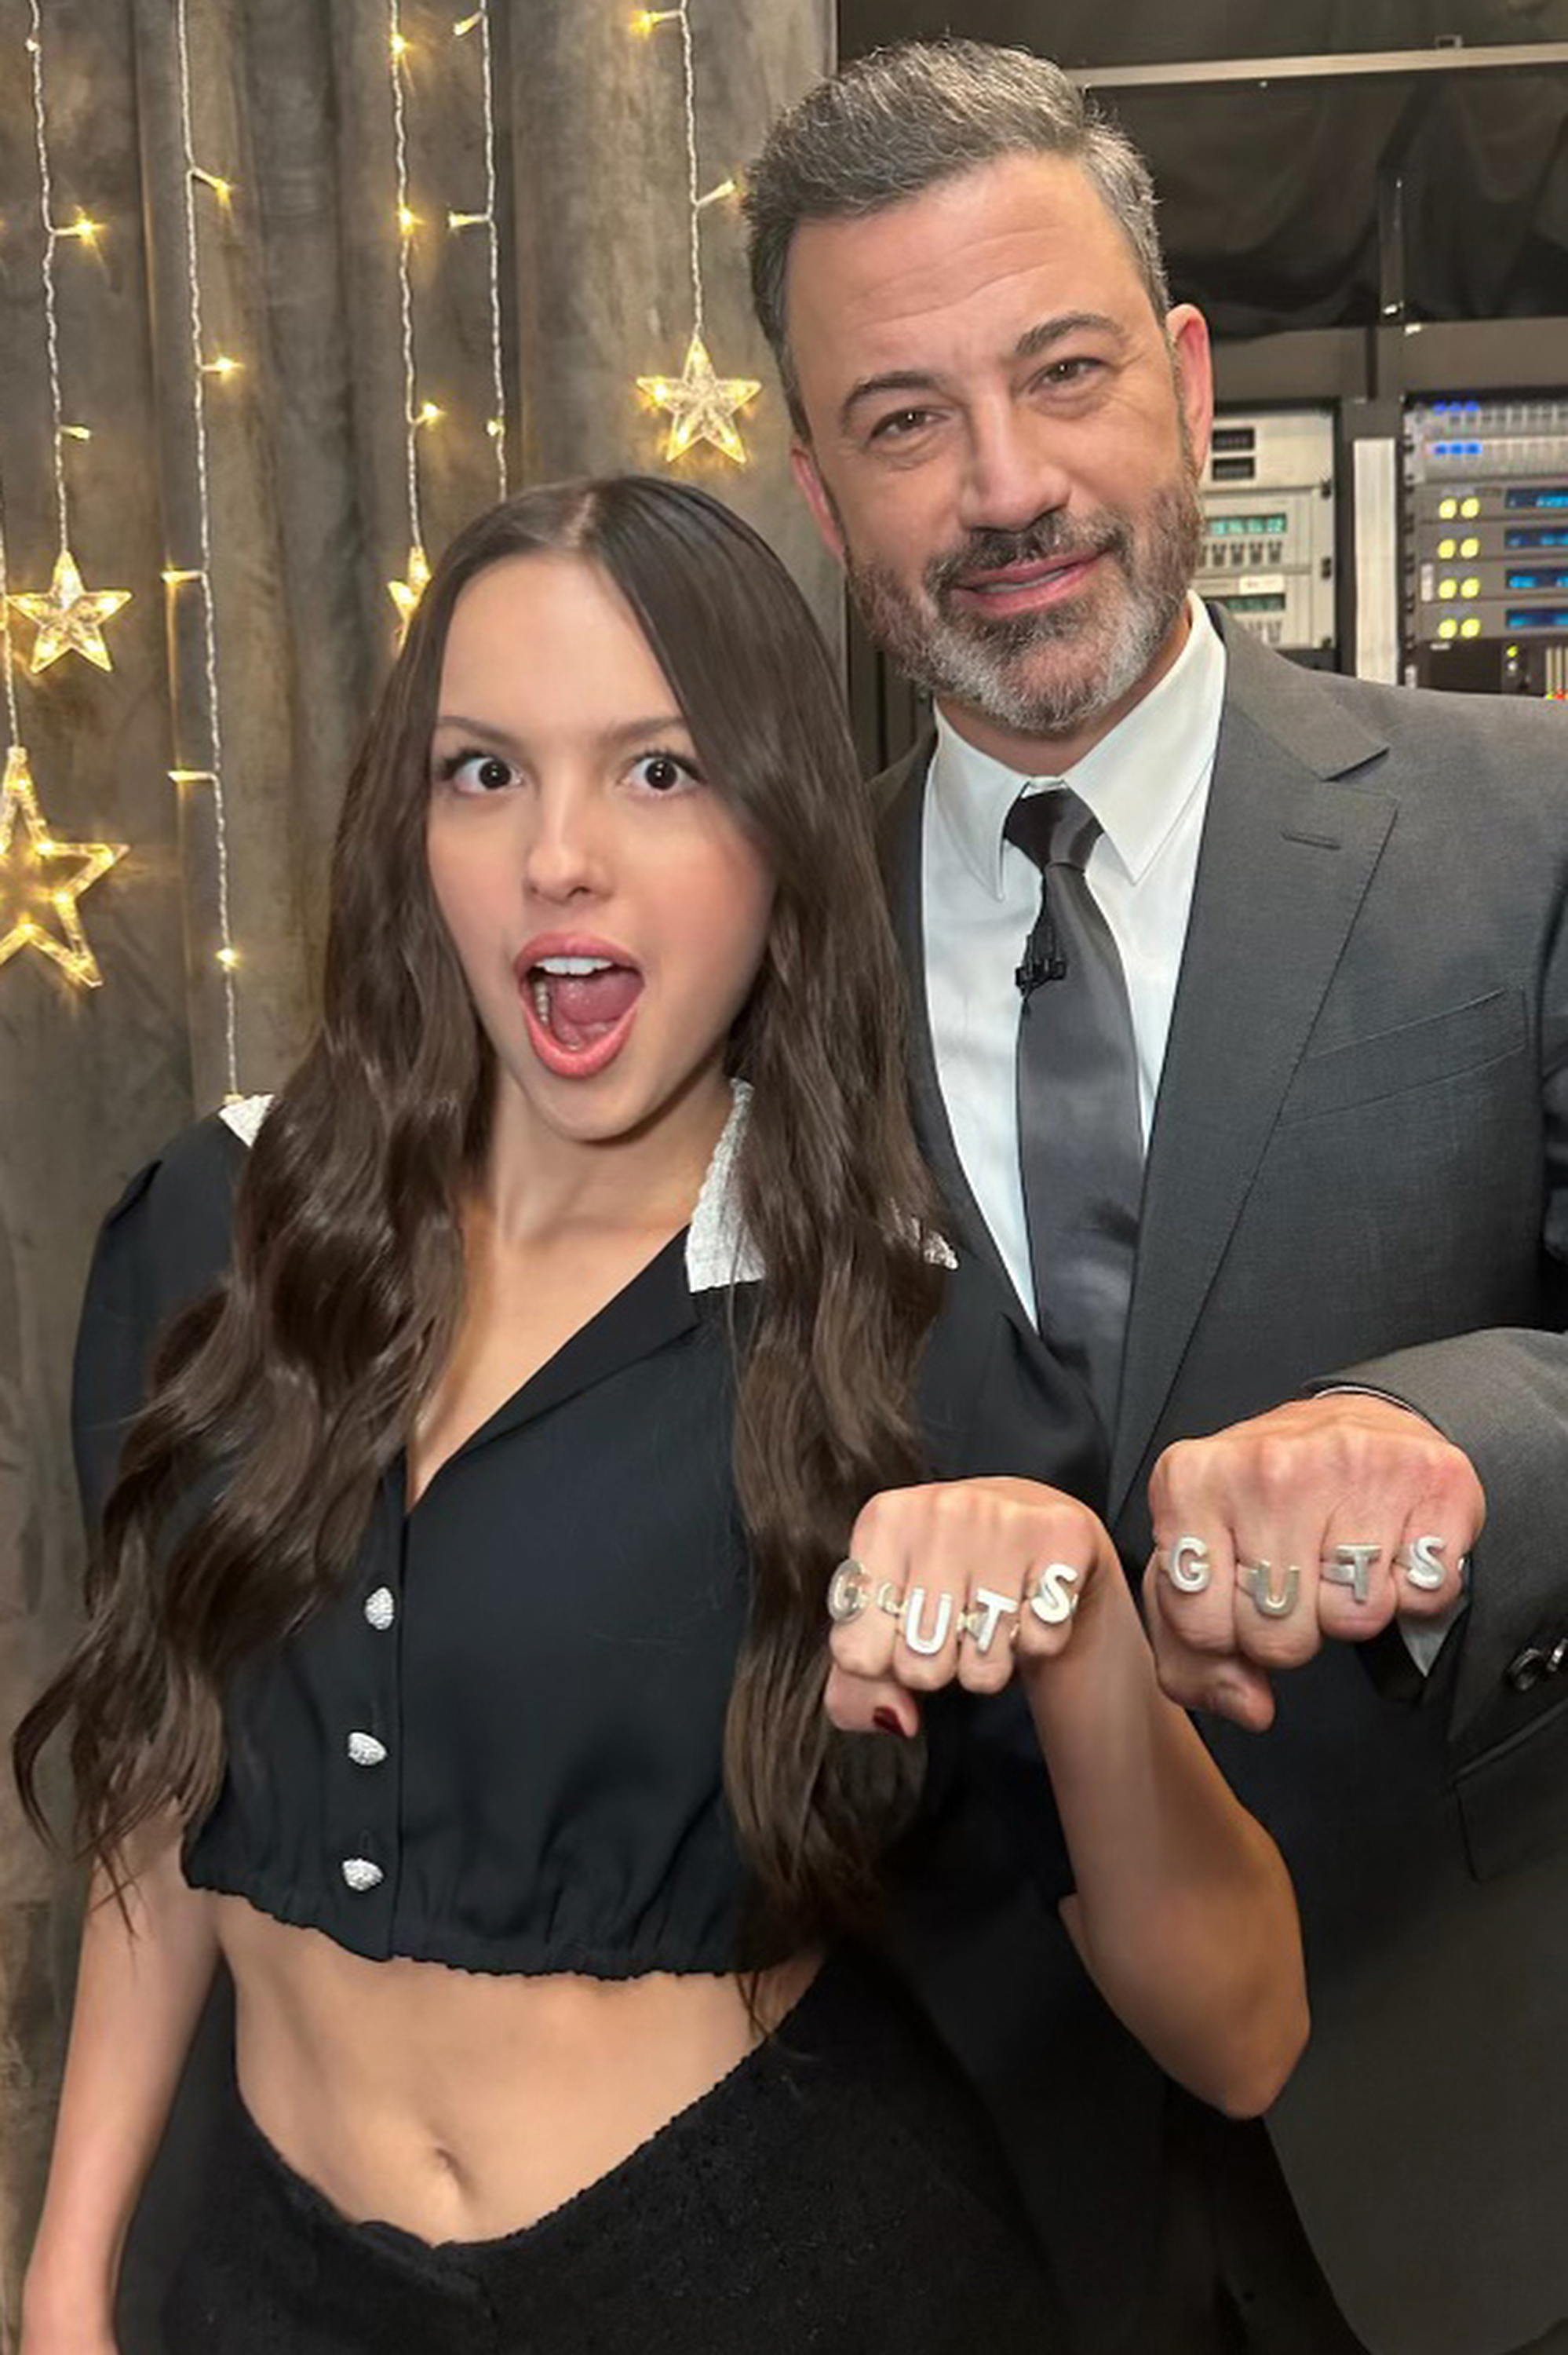 Close-up of Olivia and Jimmy holding up &quot;Guts&quot; rings